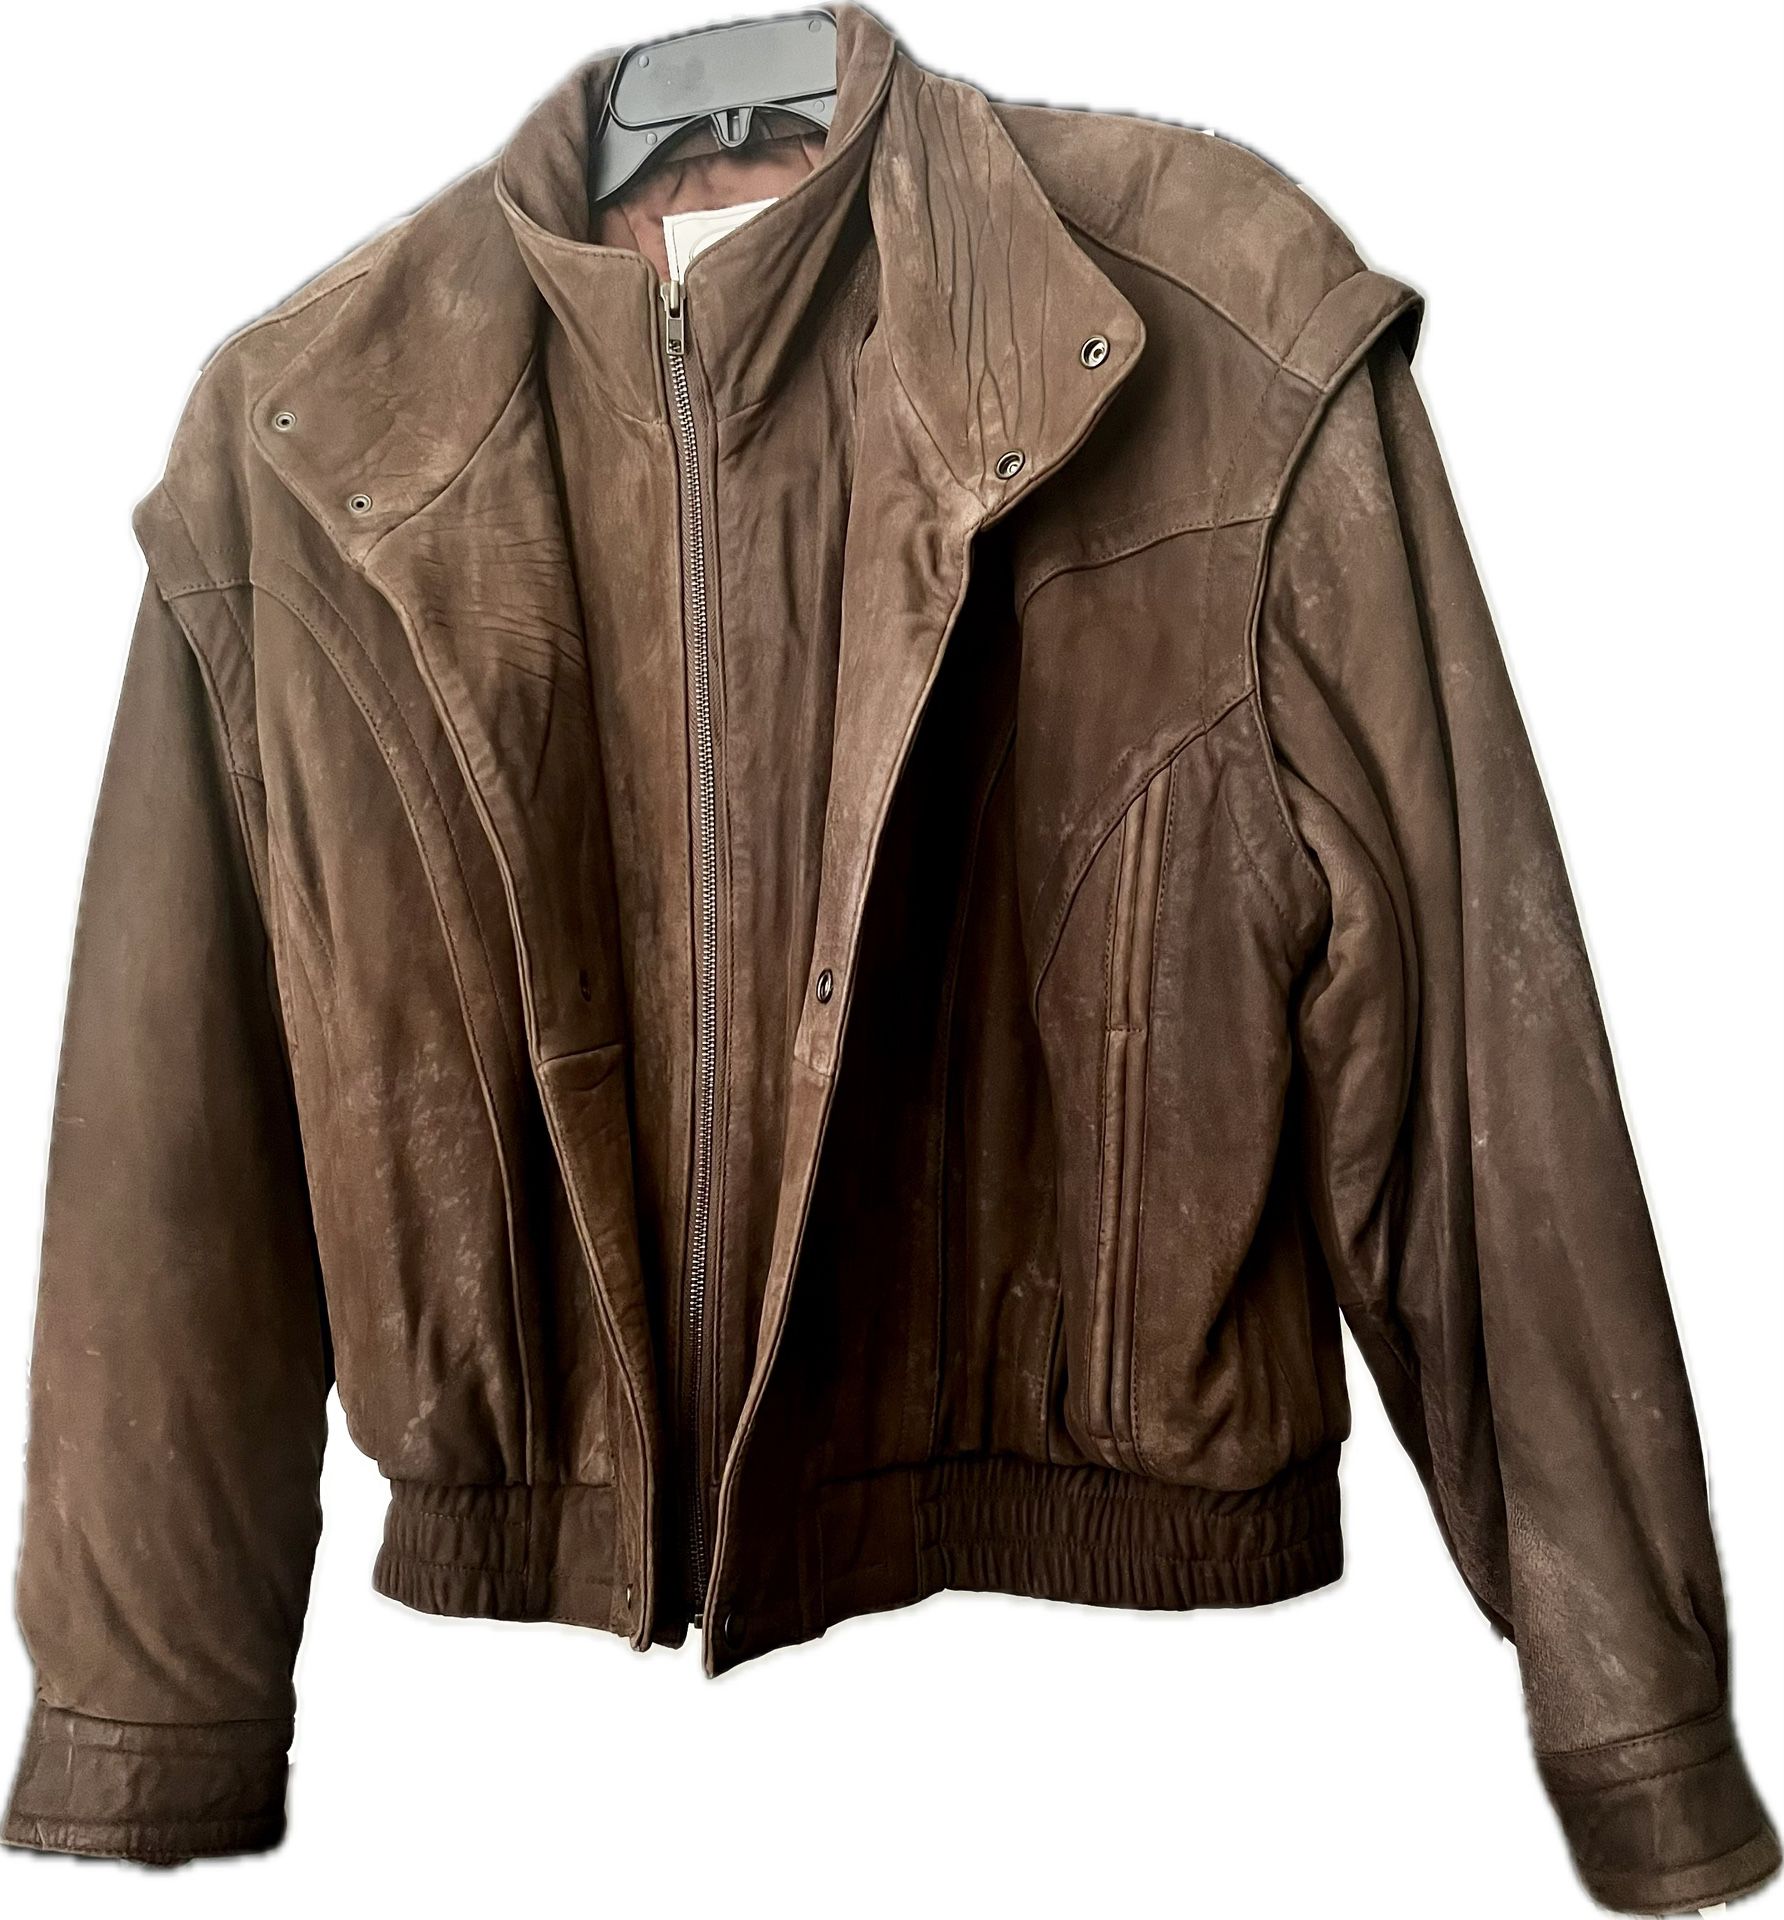 Midway Leather Jacket Mens Large Brown Bomber Flight